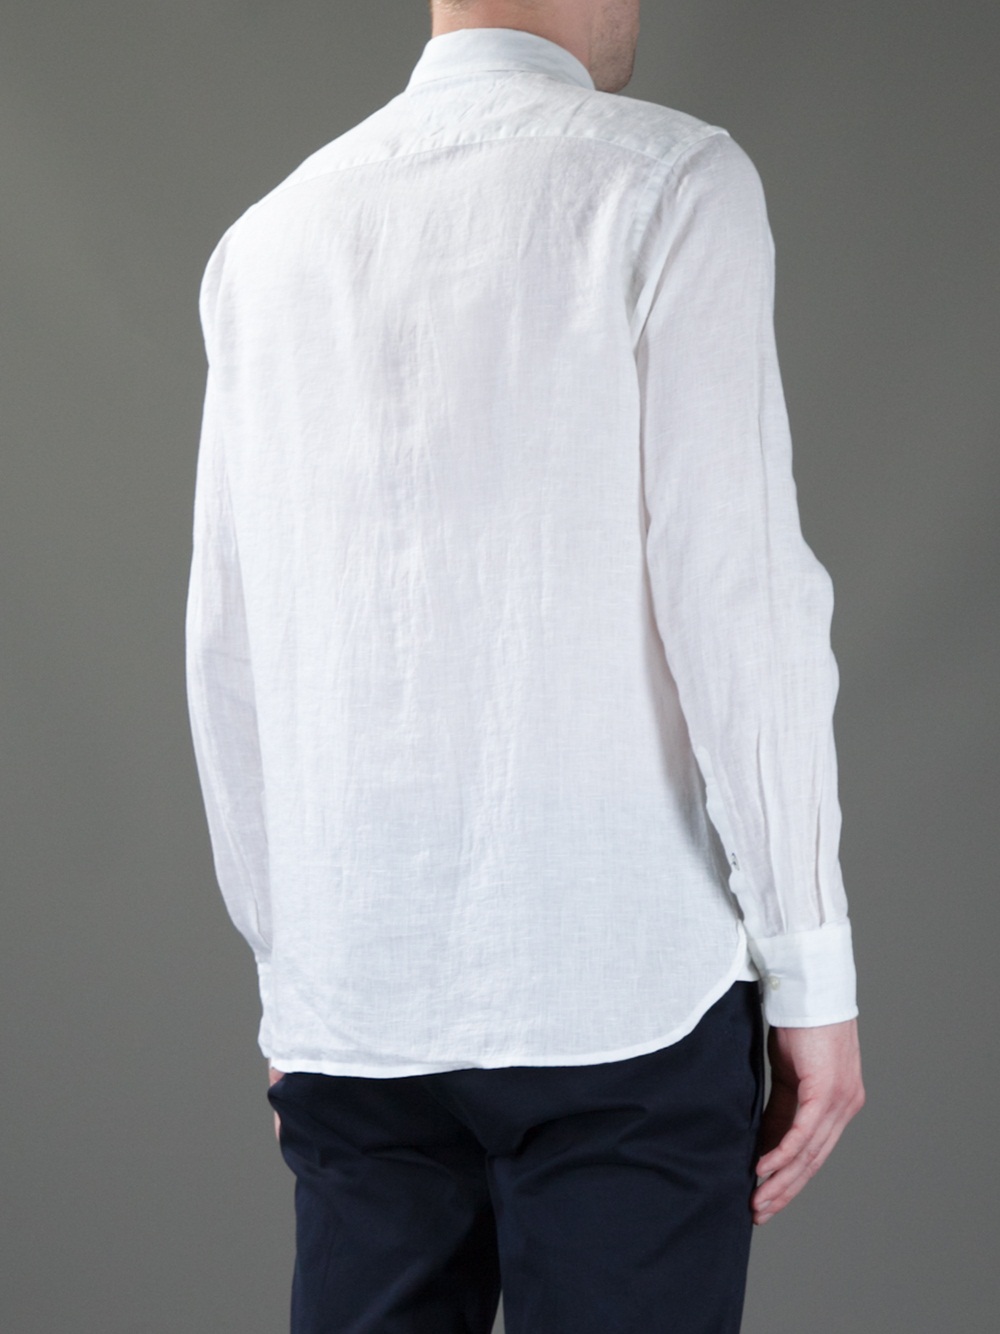 Lyst - Tommy Hilfiger Classic Linen Shirt in White for Men